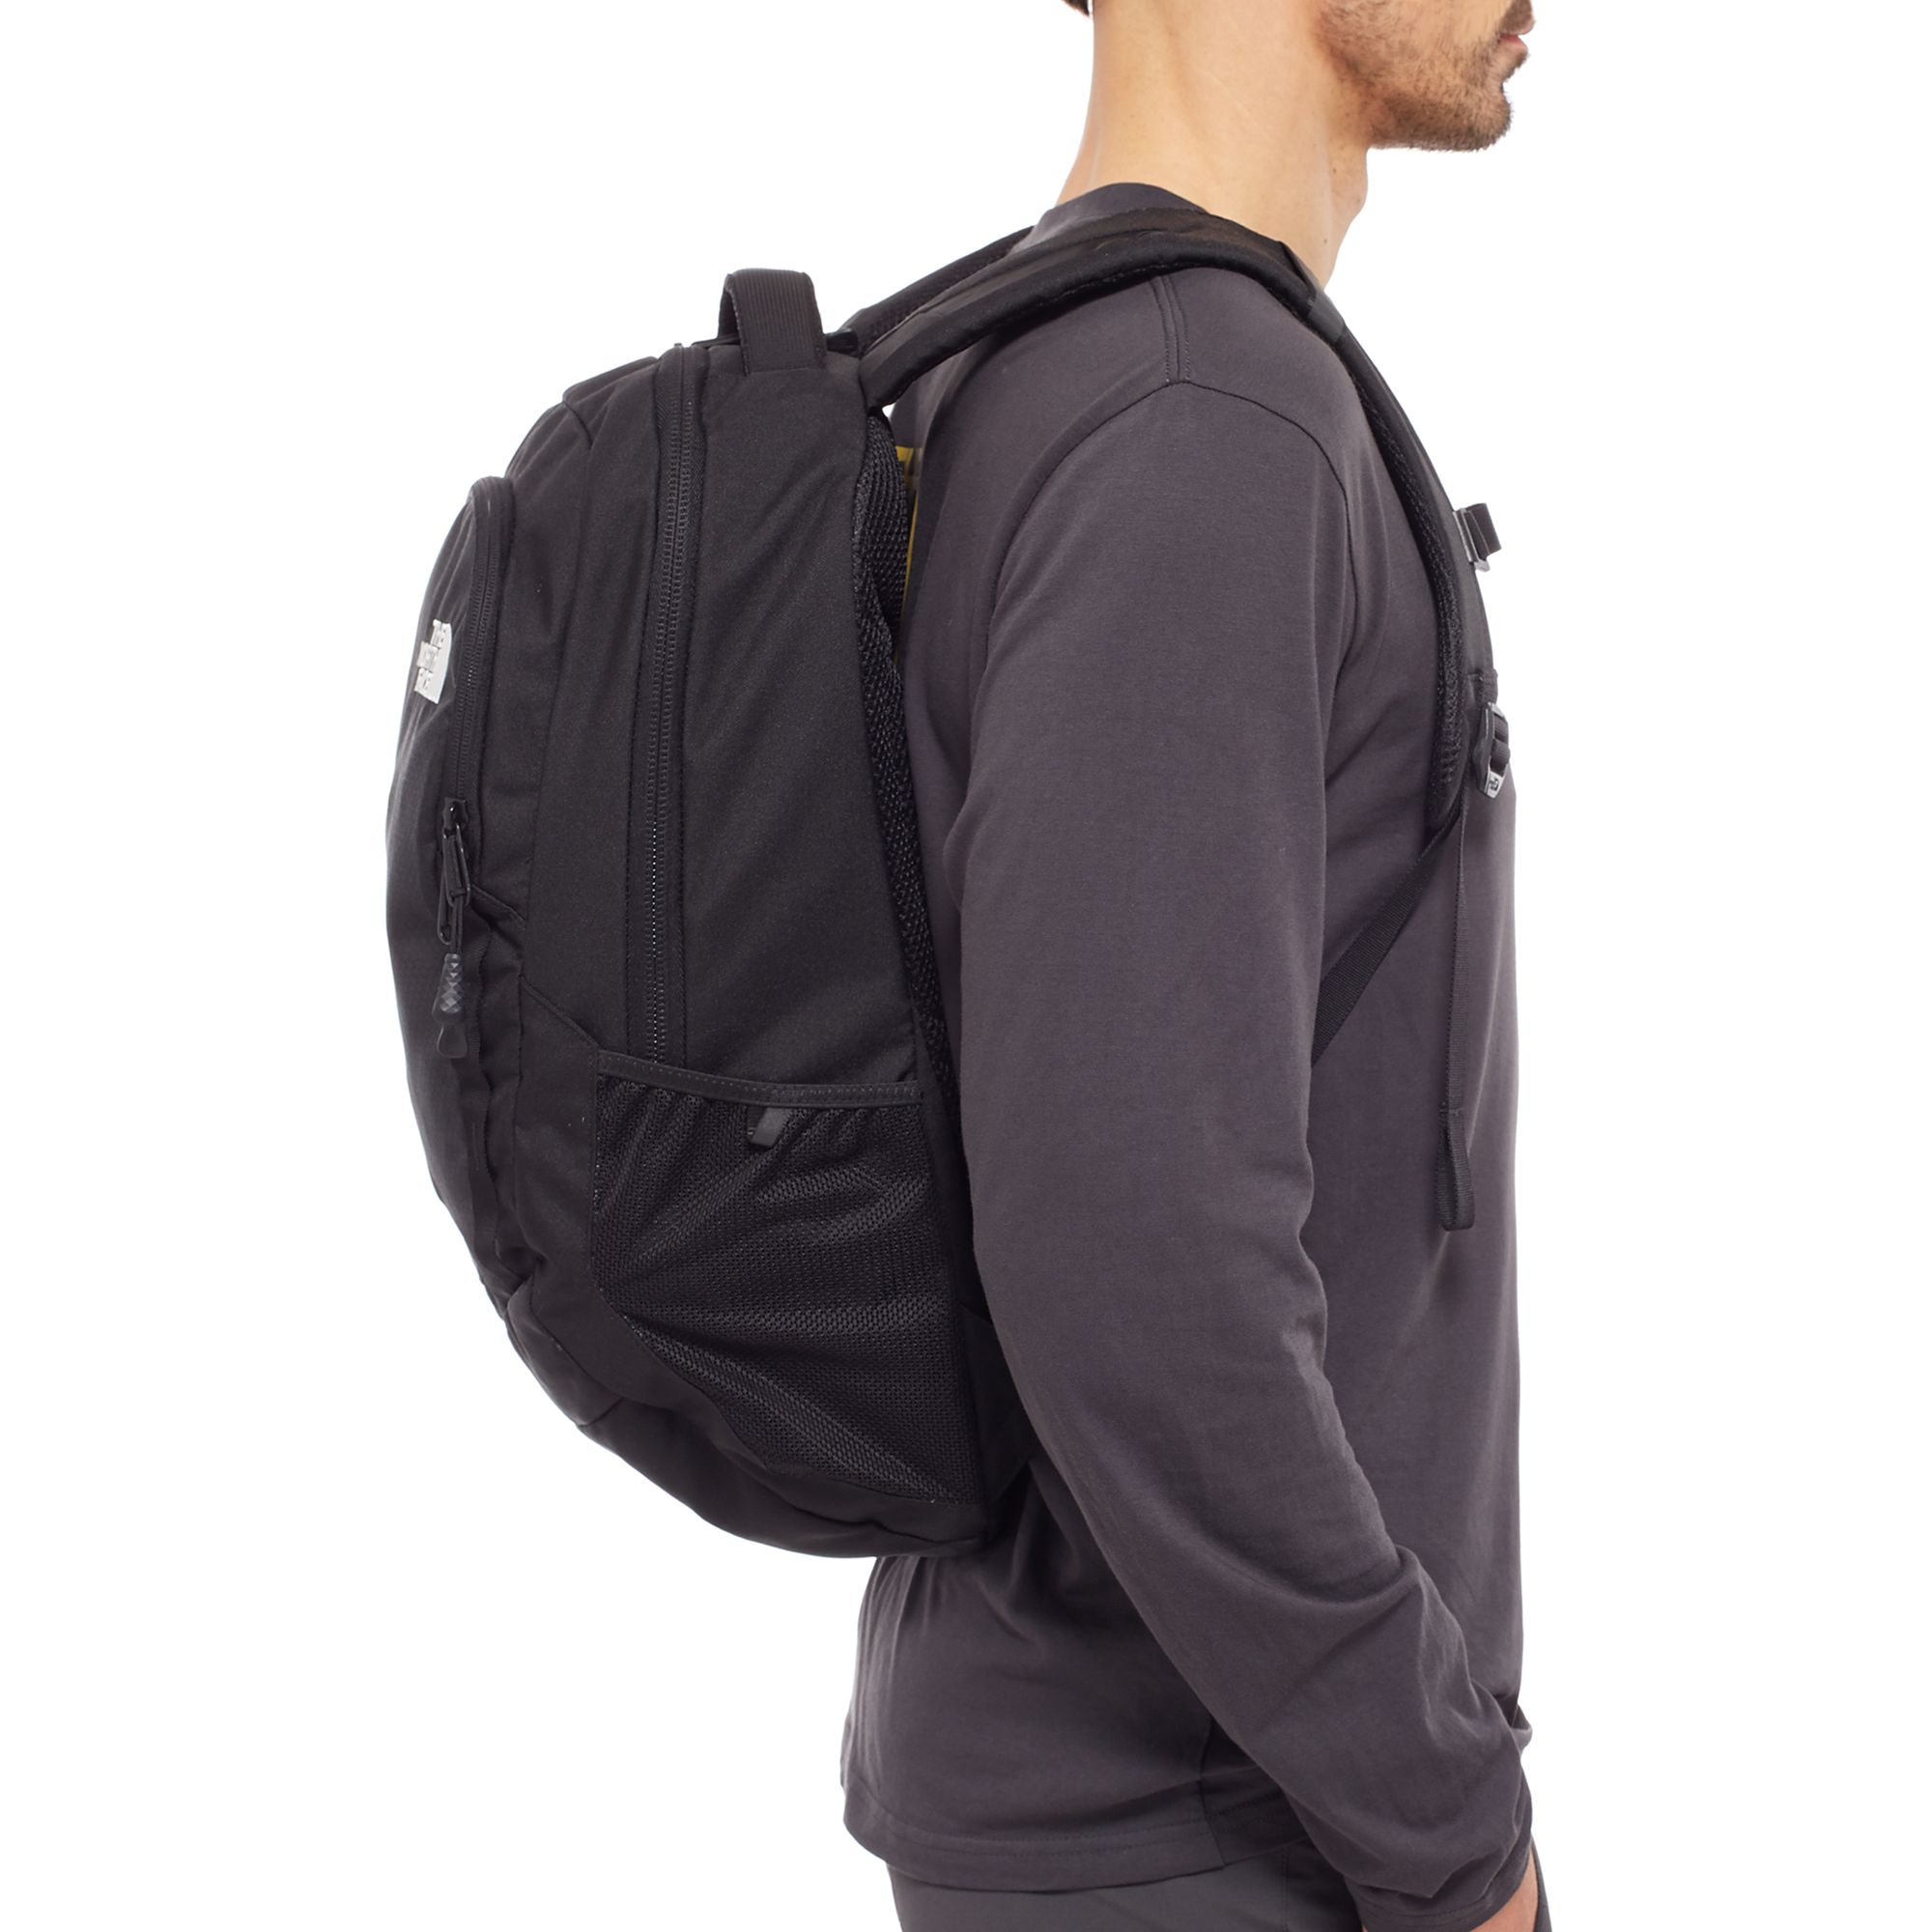 north face vault backpack dimensions